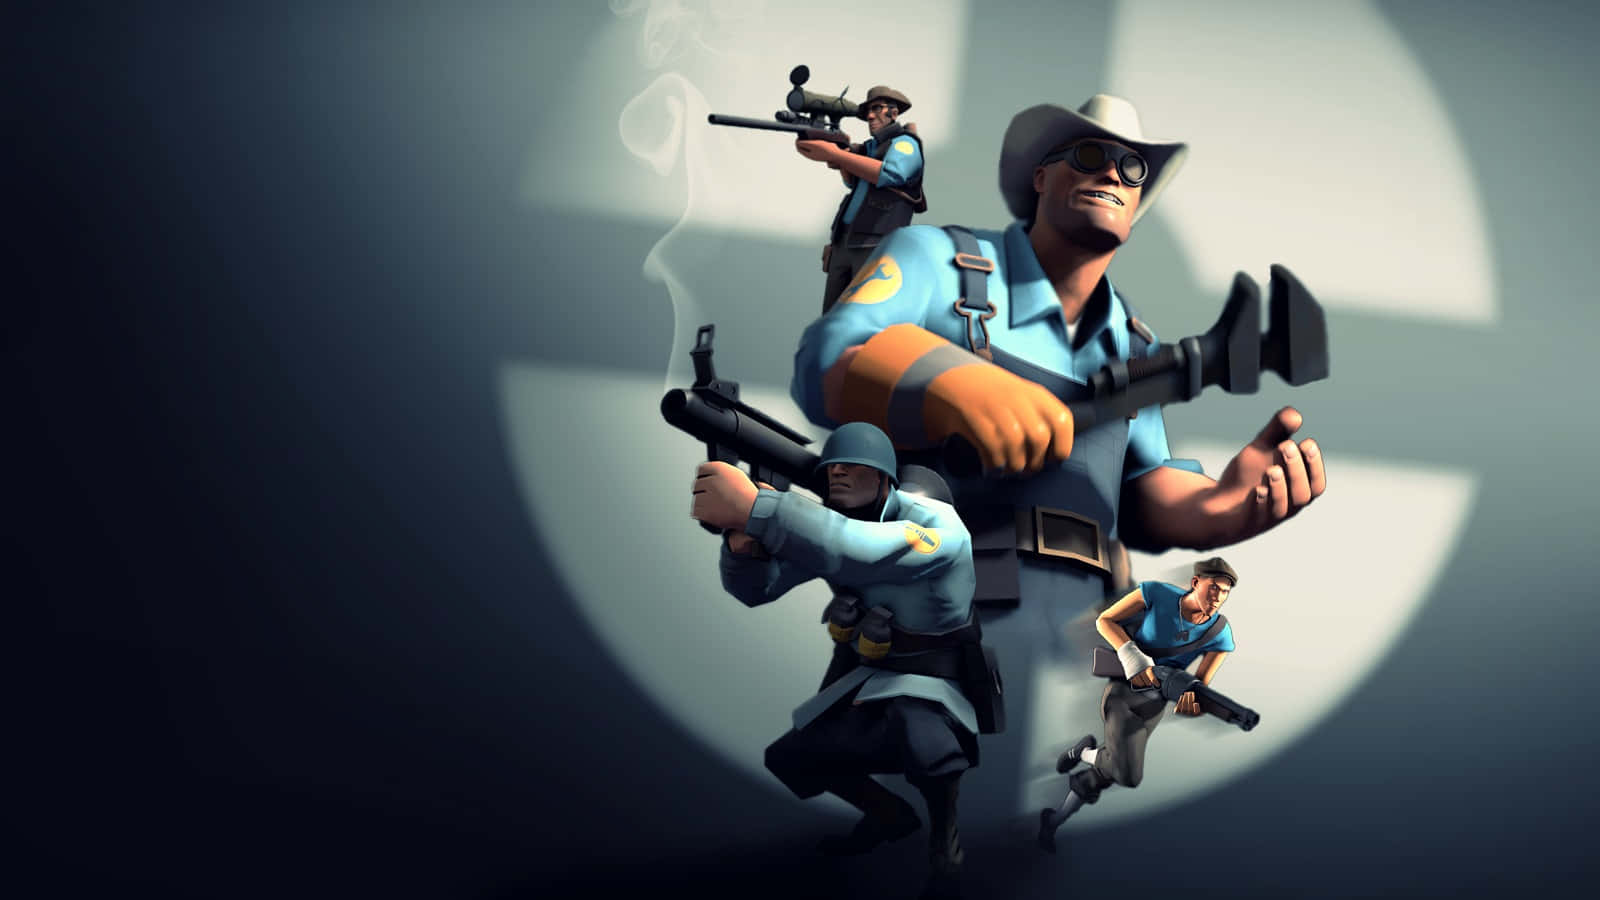 The Legendary Cast of Team Fortress 2 Characters Wallpaper